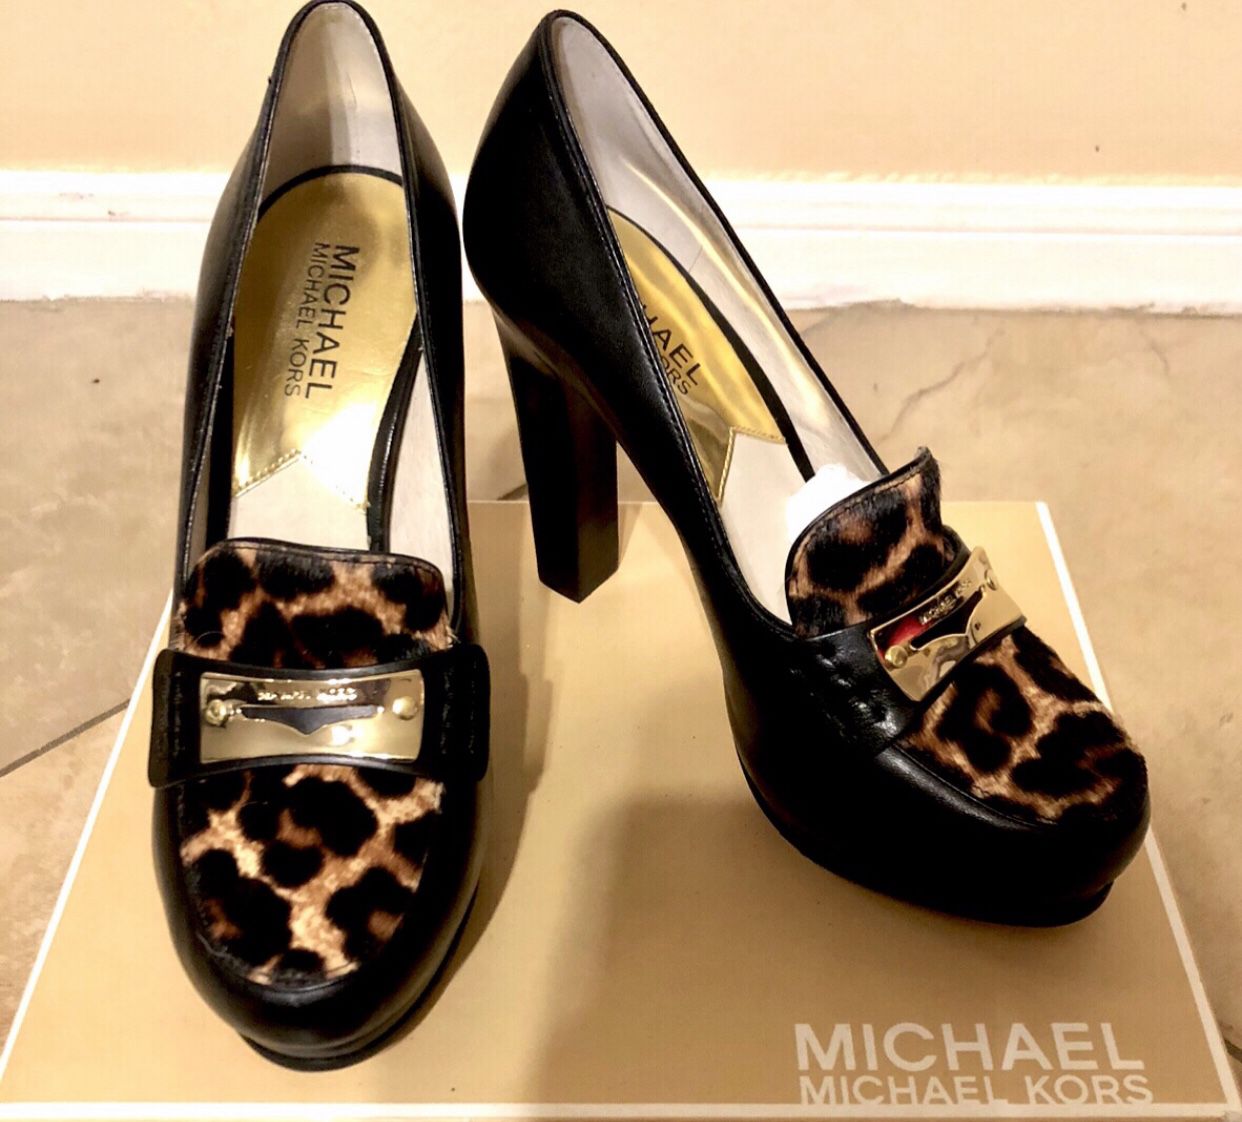 Micheal Kors Cheetach & Gold plate-penny loafer heels -NEW with Box Size 7-77064 zip code  